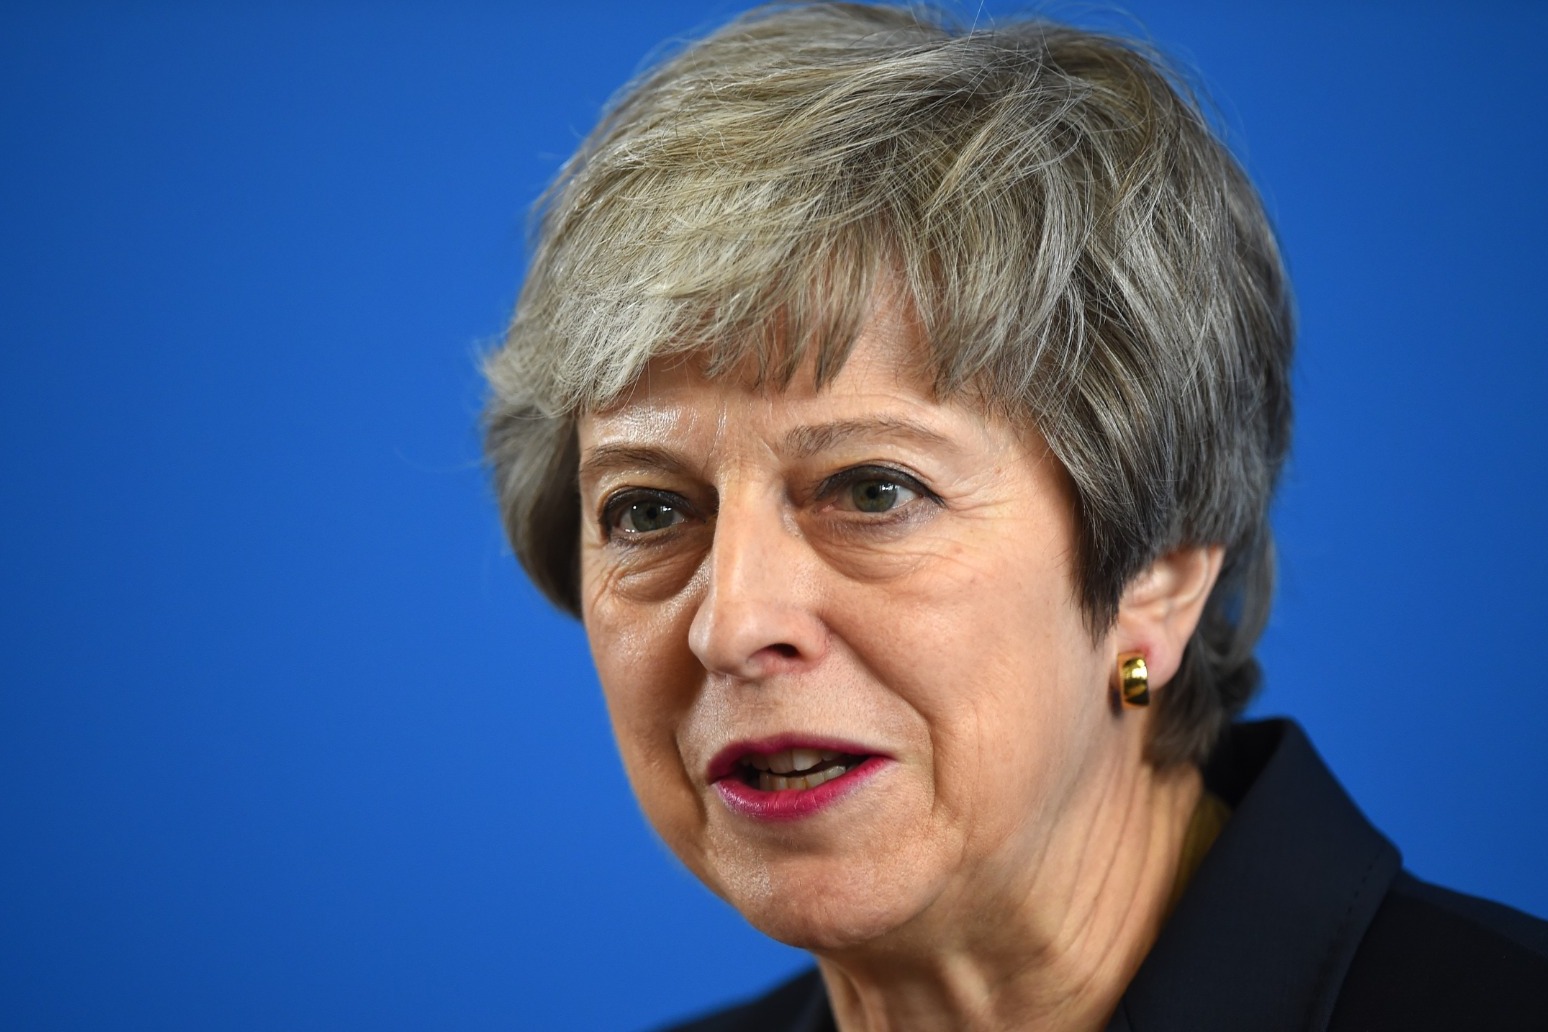 ‘Nobody is above the law’ – Theresa May breaks silence on partygate saga 